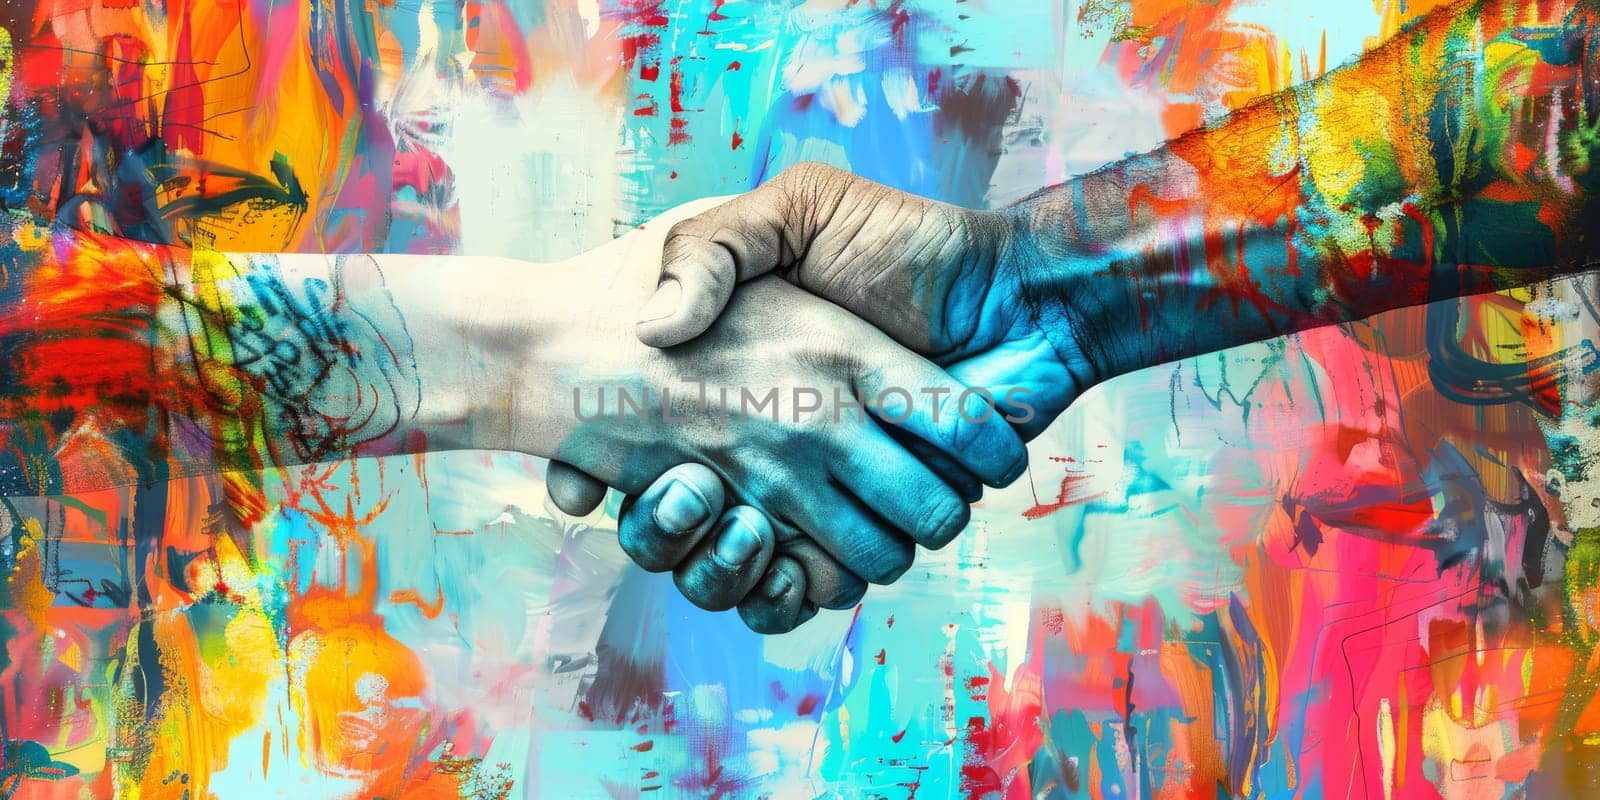 Two individuals shaking hands in front of vibrant colors by Kadula